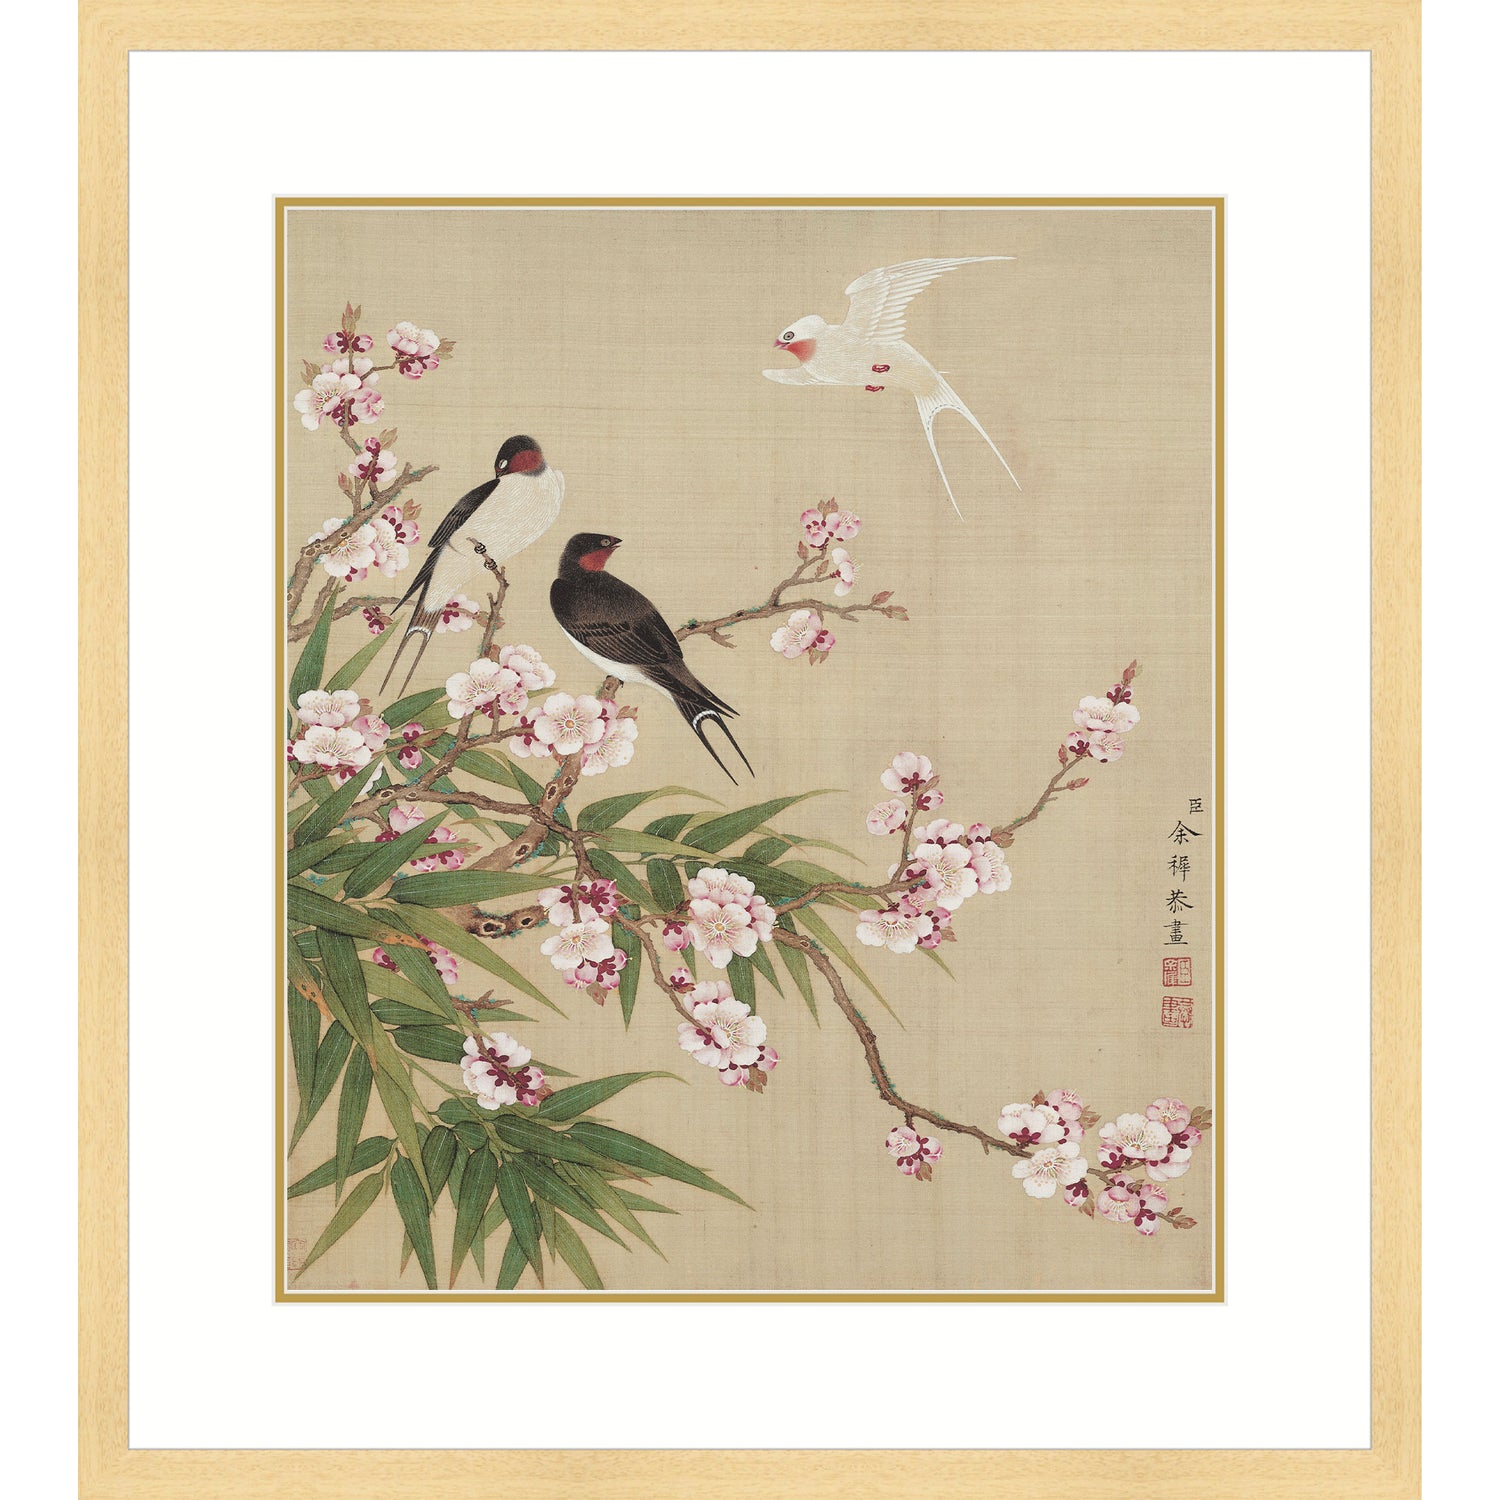 Swallows and Peach Blossoms